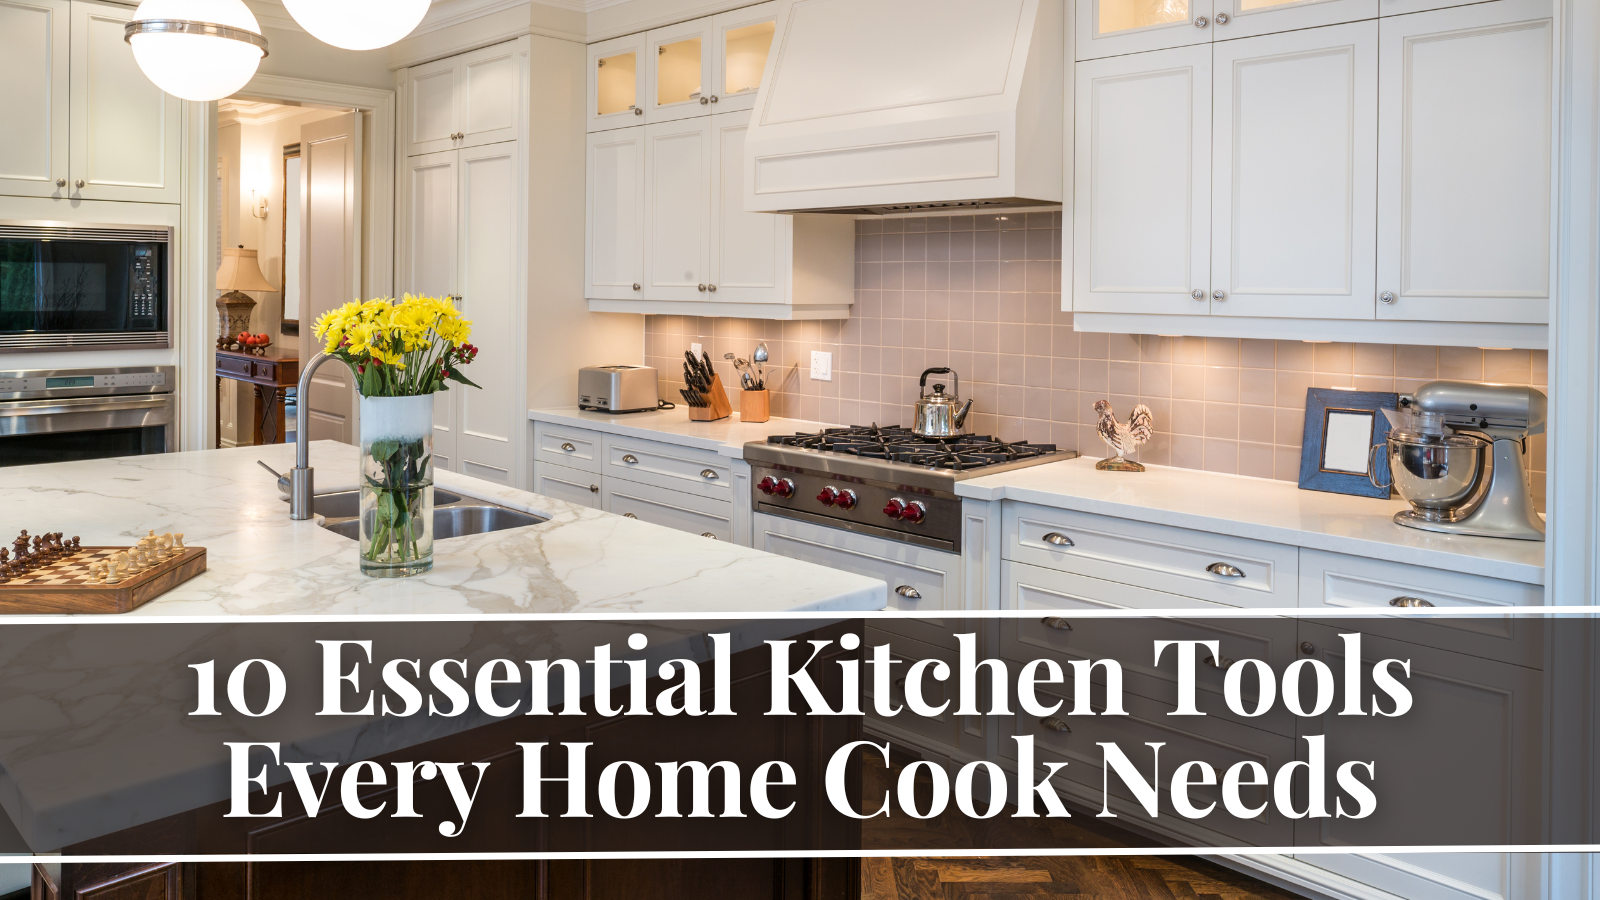 Essential Kitchen Tools For Every Home Kitchen - How To Kitchen